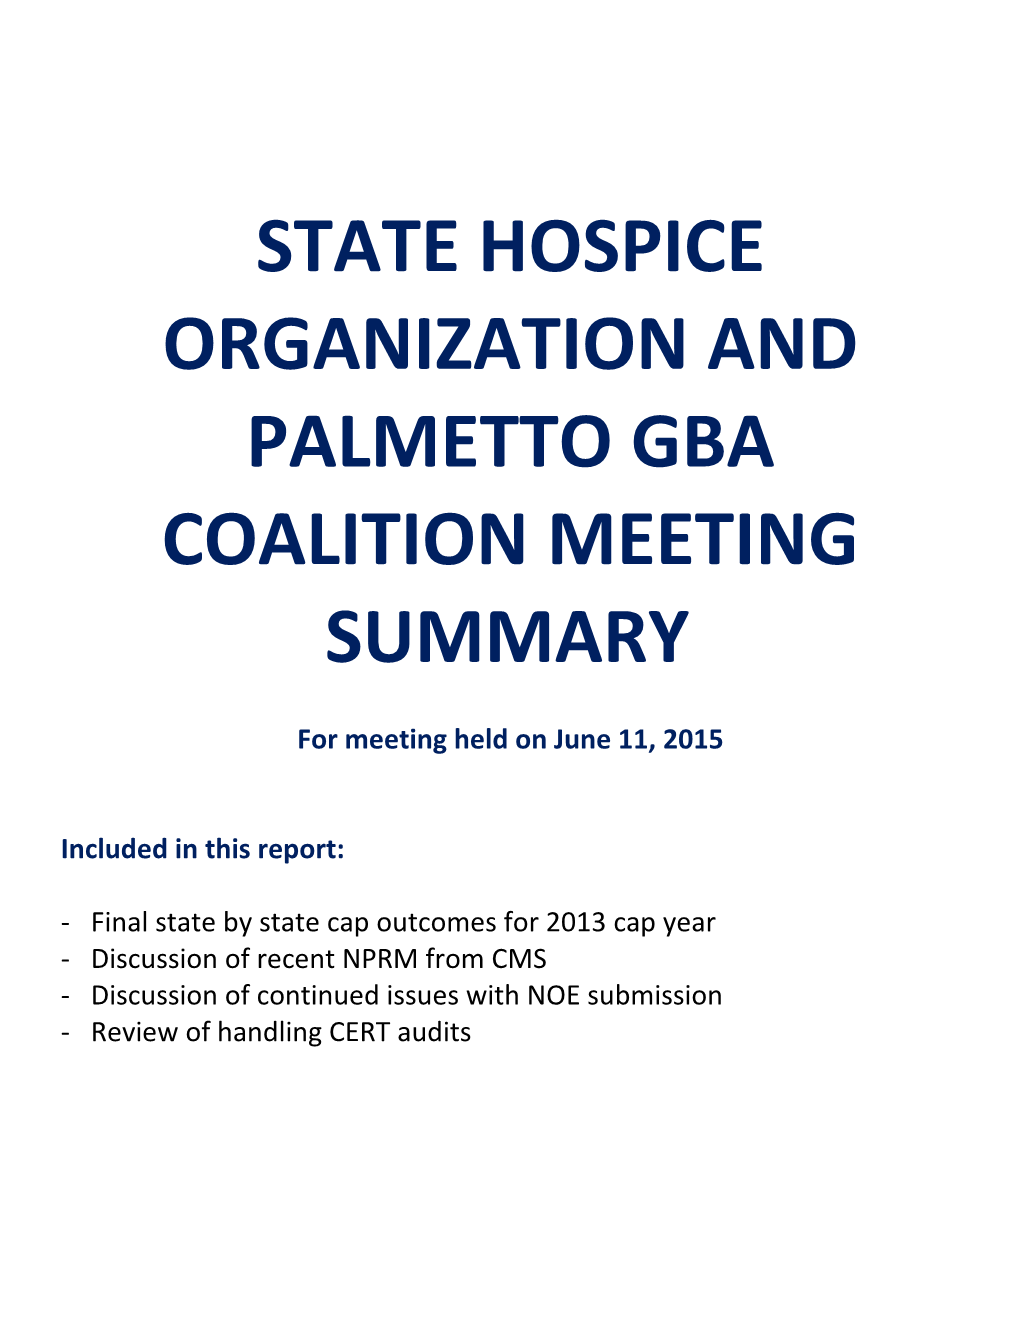 State Hospice Organization and Palmetto Gba Coalition Meeting Summary